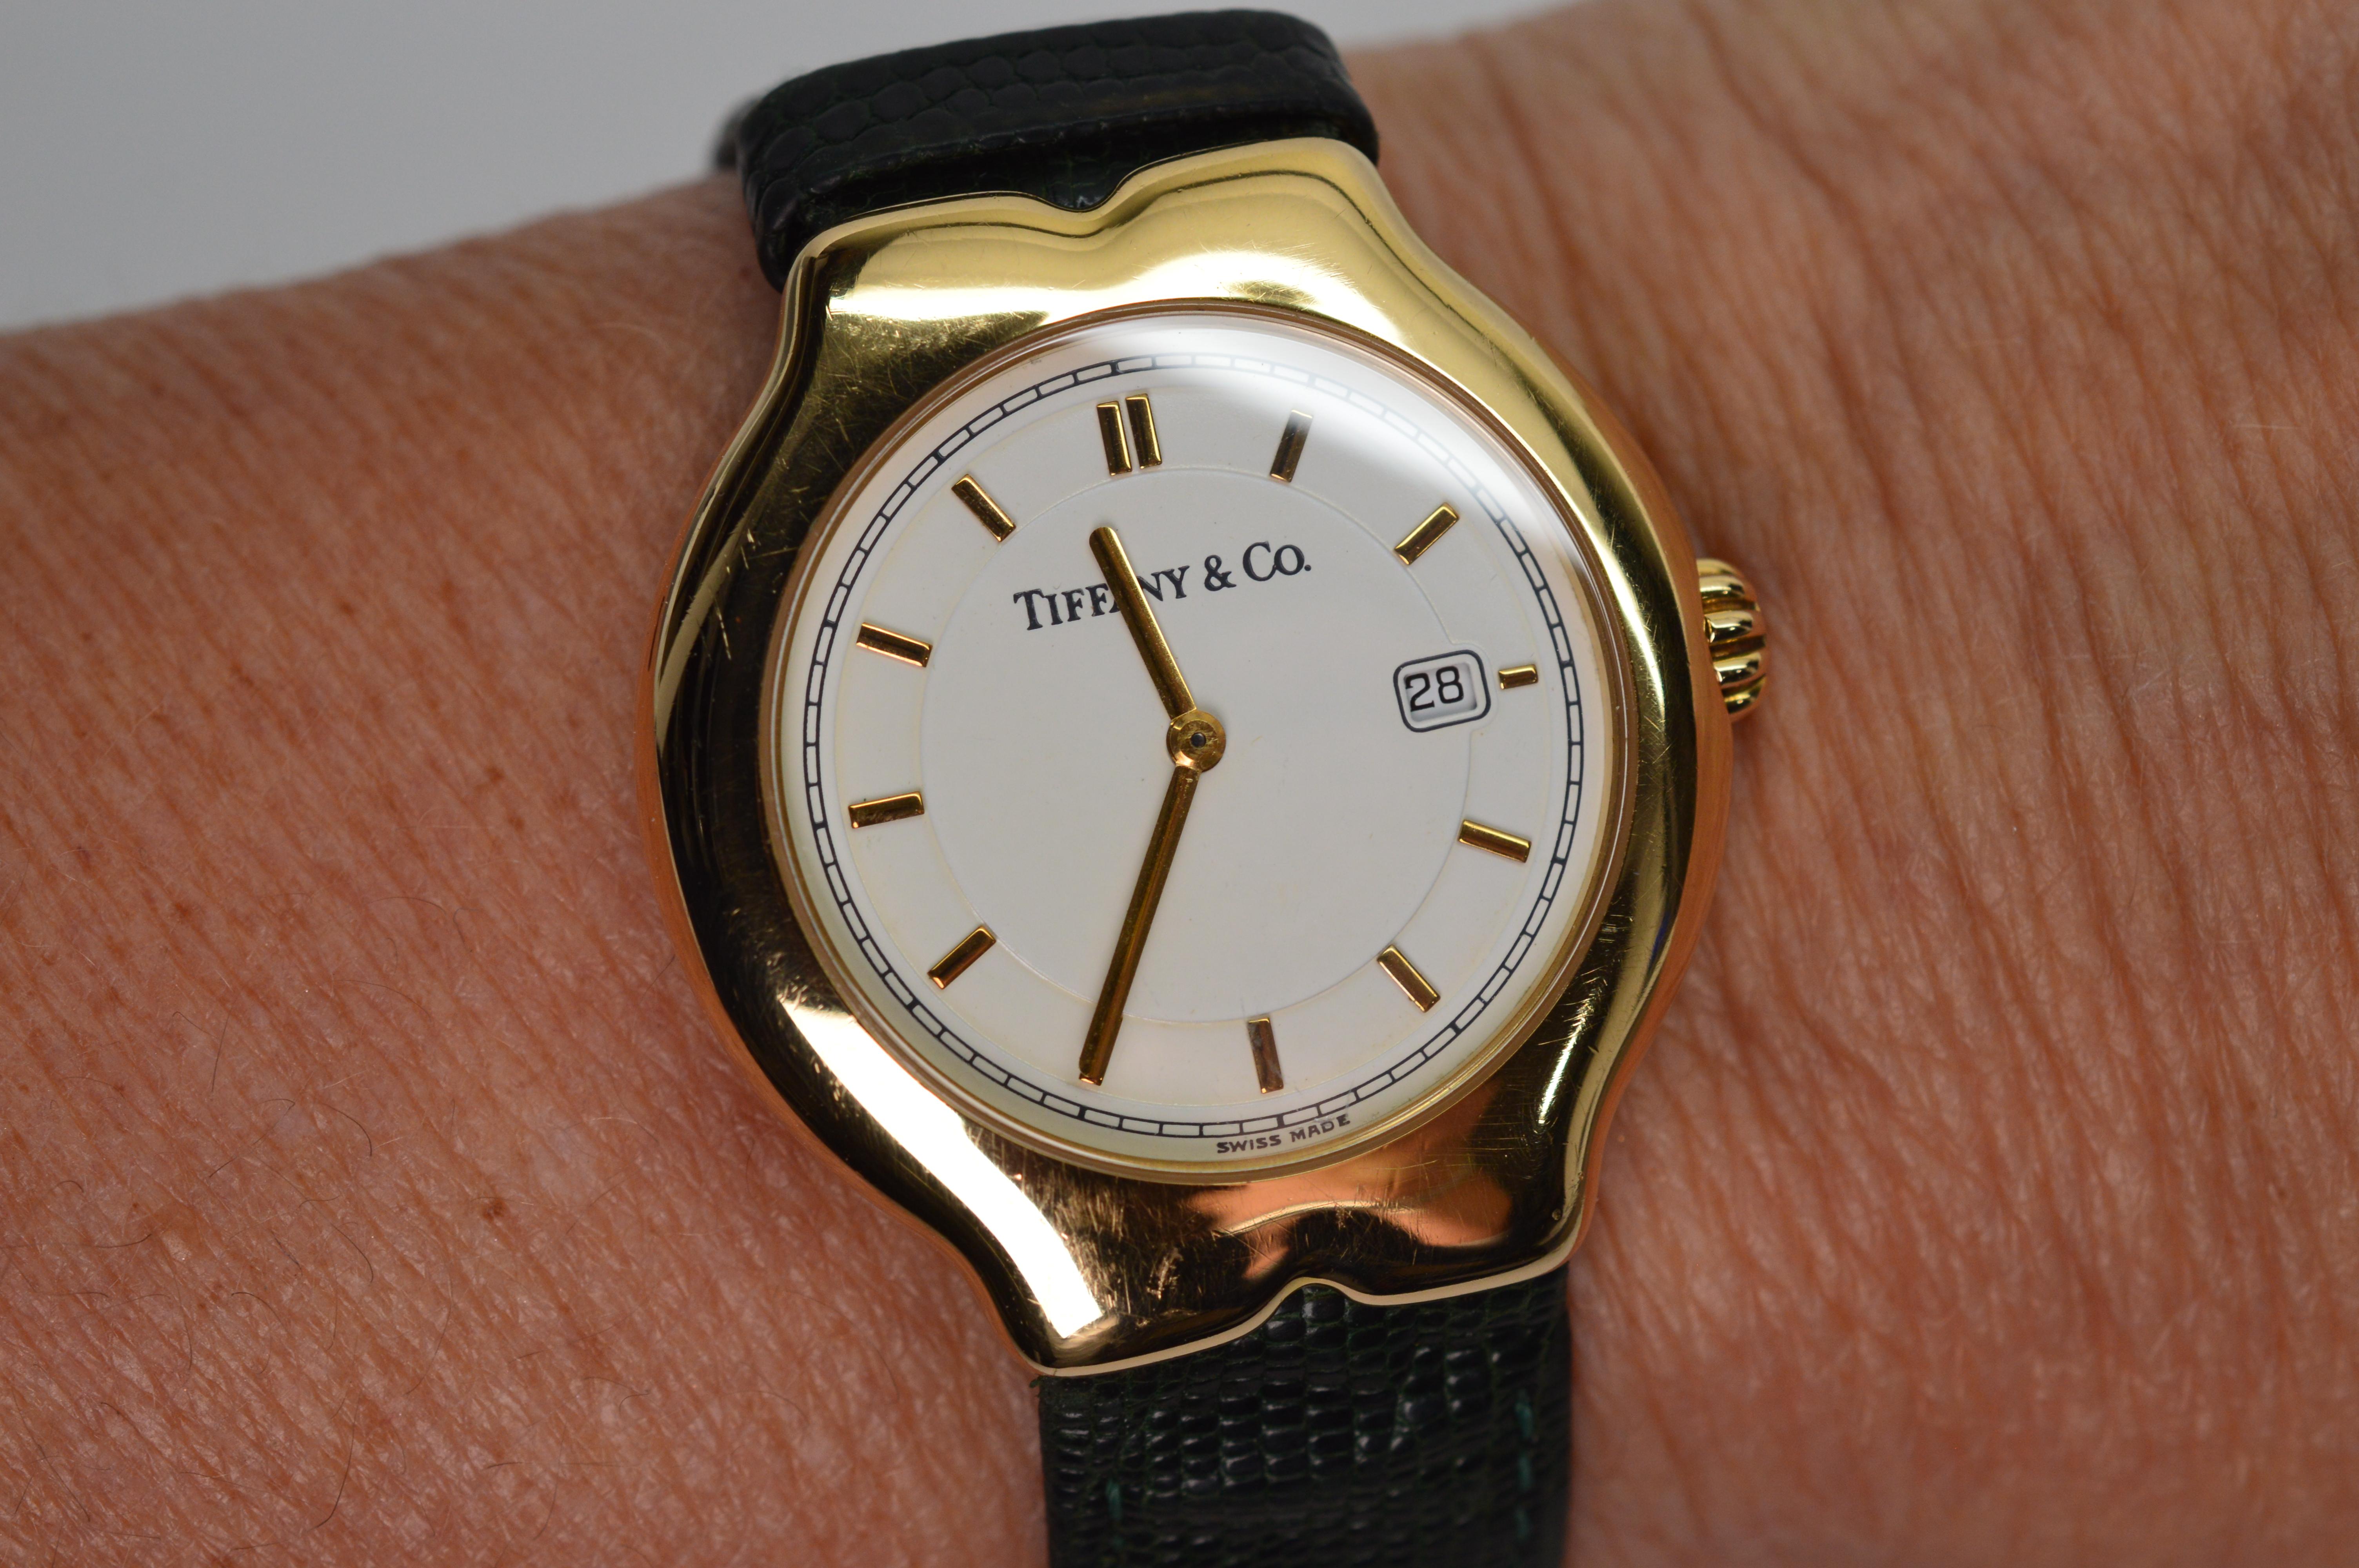 Classic Tiffany and always smart in style. This favorite Tiffany & Co. Tesoro Model Women's Wrist Watch in eighteen karat yellow gold 18K has an easy to read white face with gold match stick numeral markers and date window. Displaying its original